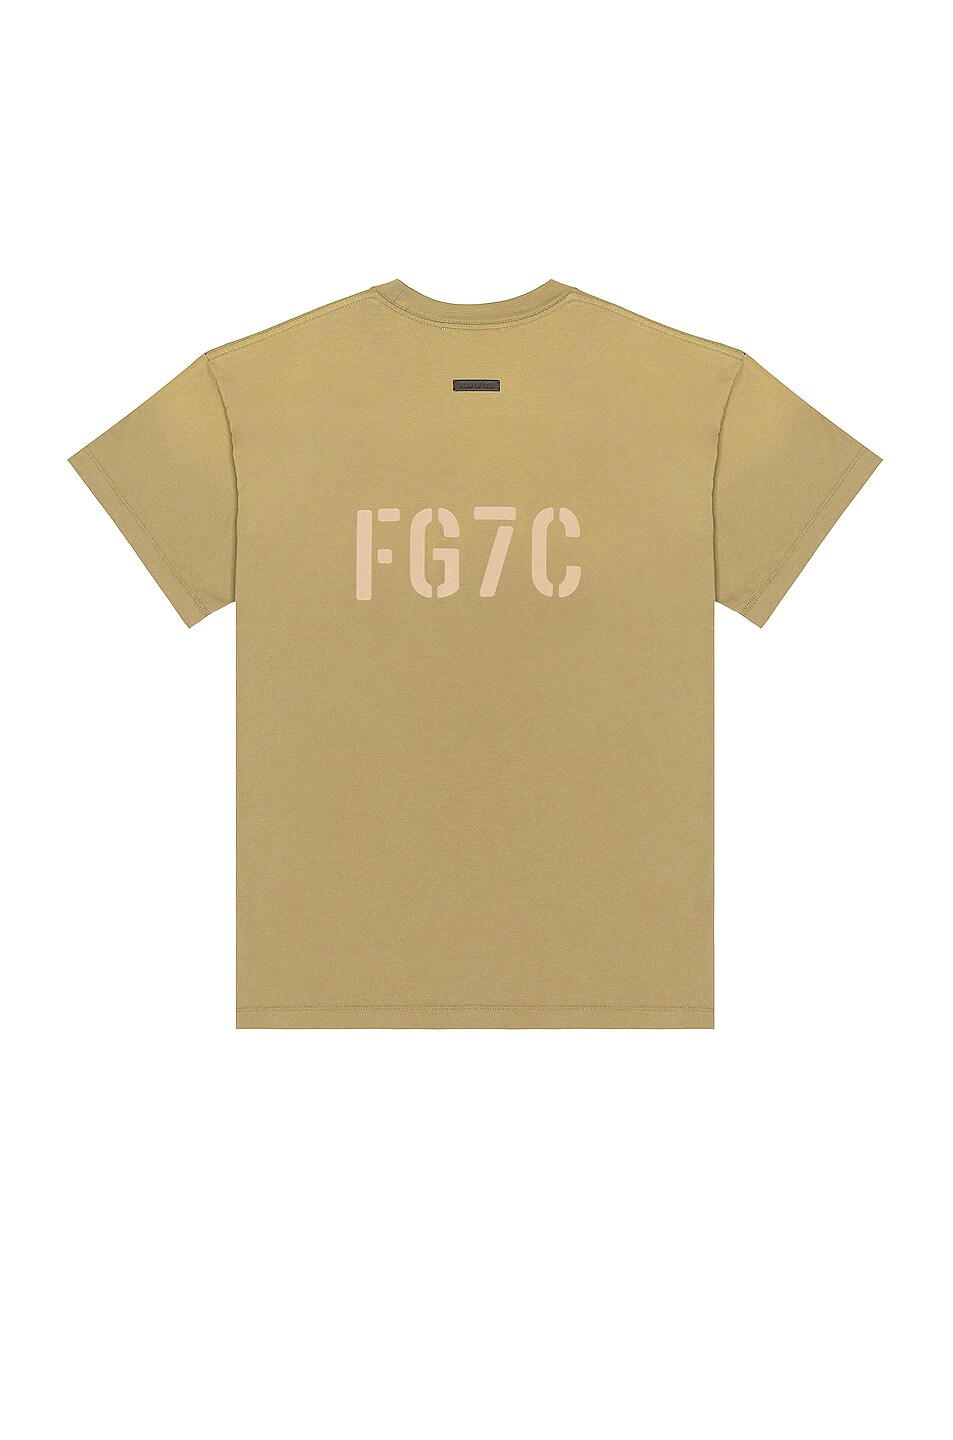 Image 1 of Fear of God FG7C Tee in Vintage Army